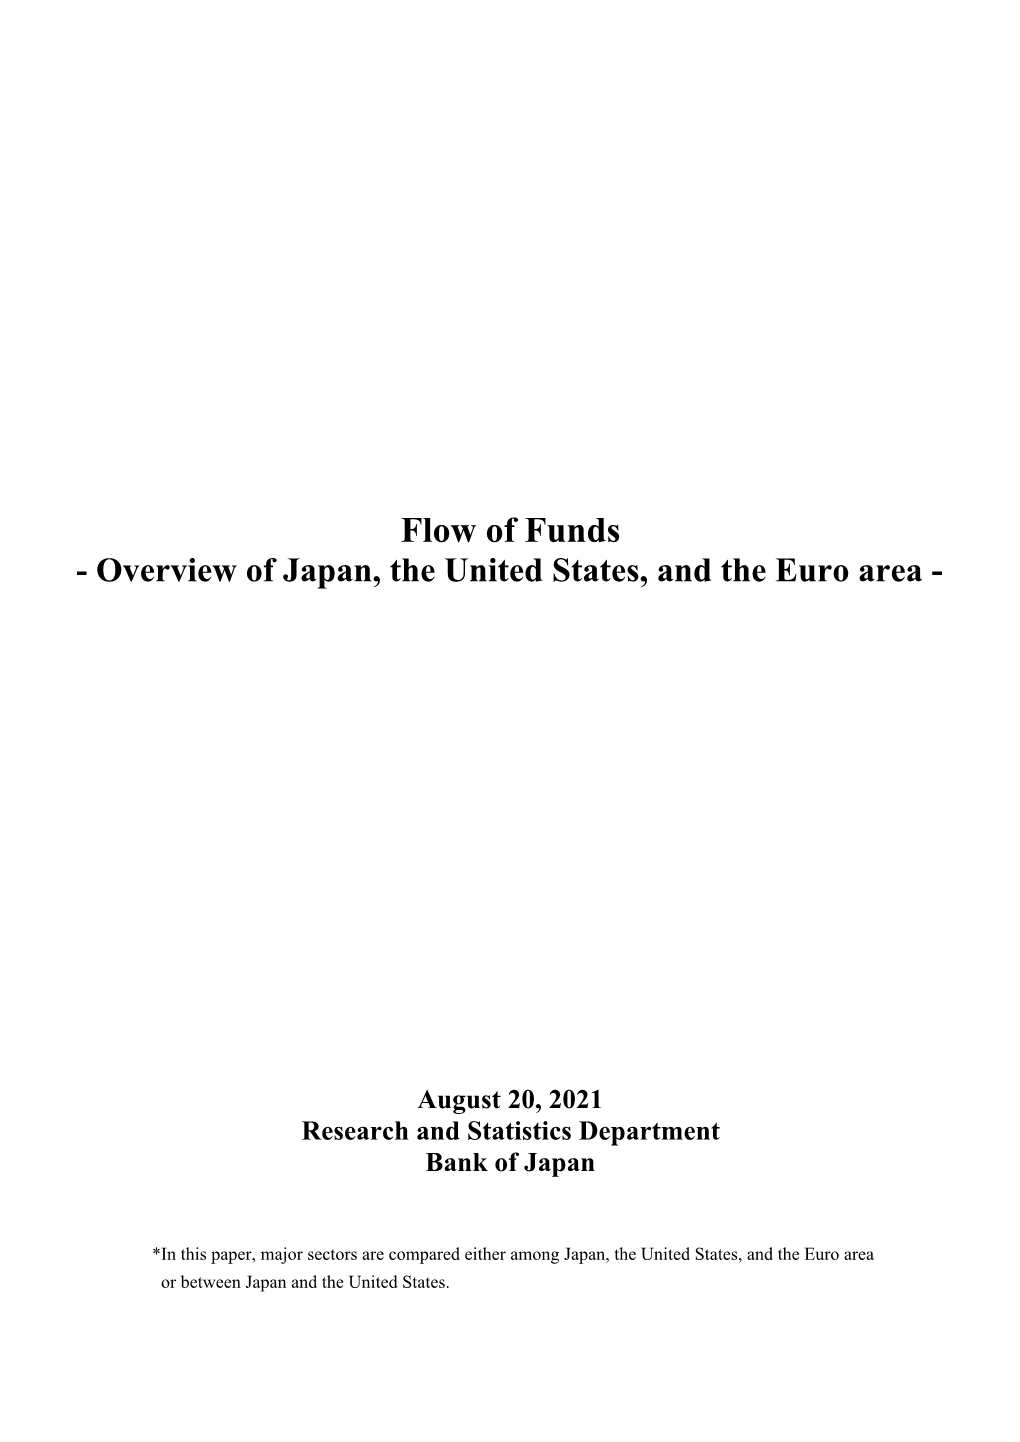 Flow of Funds - Overview of Japan, the United States, and the Euro Area